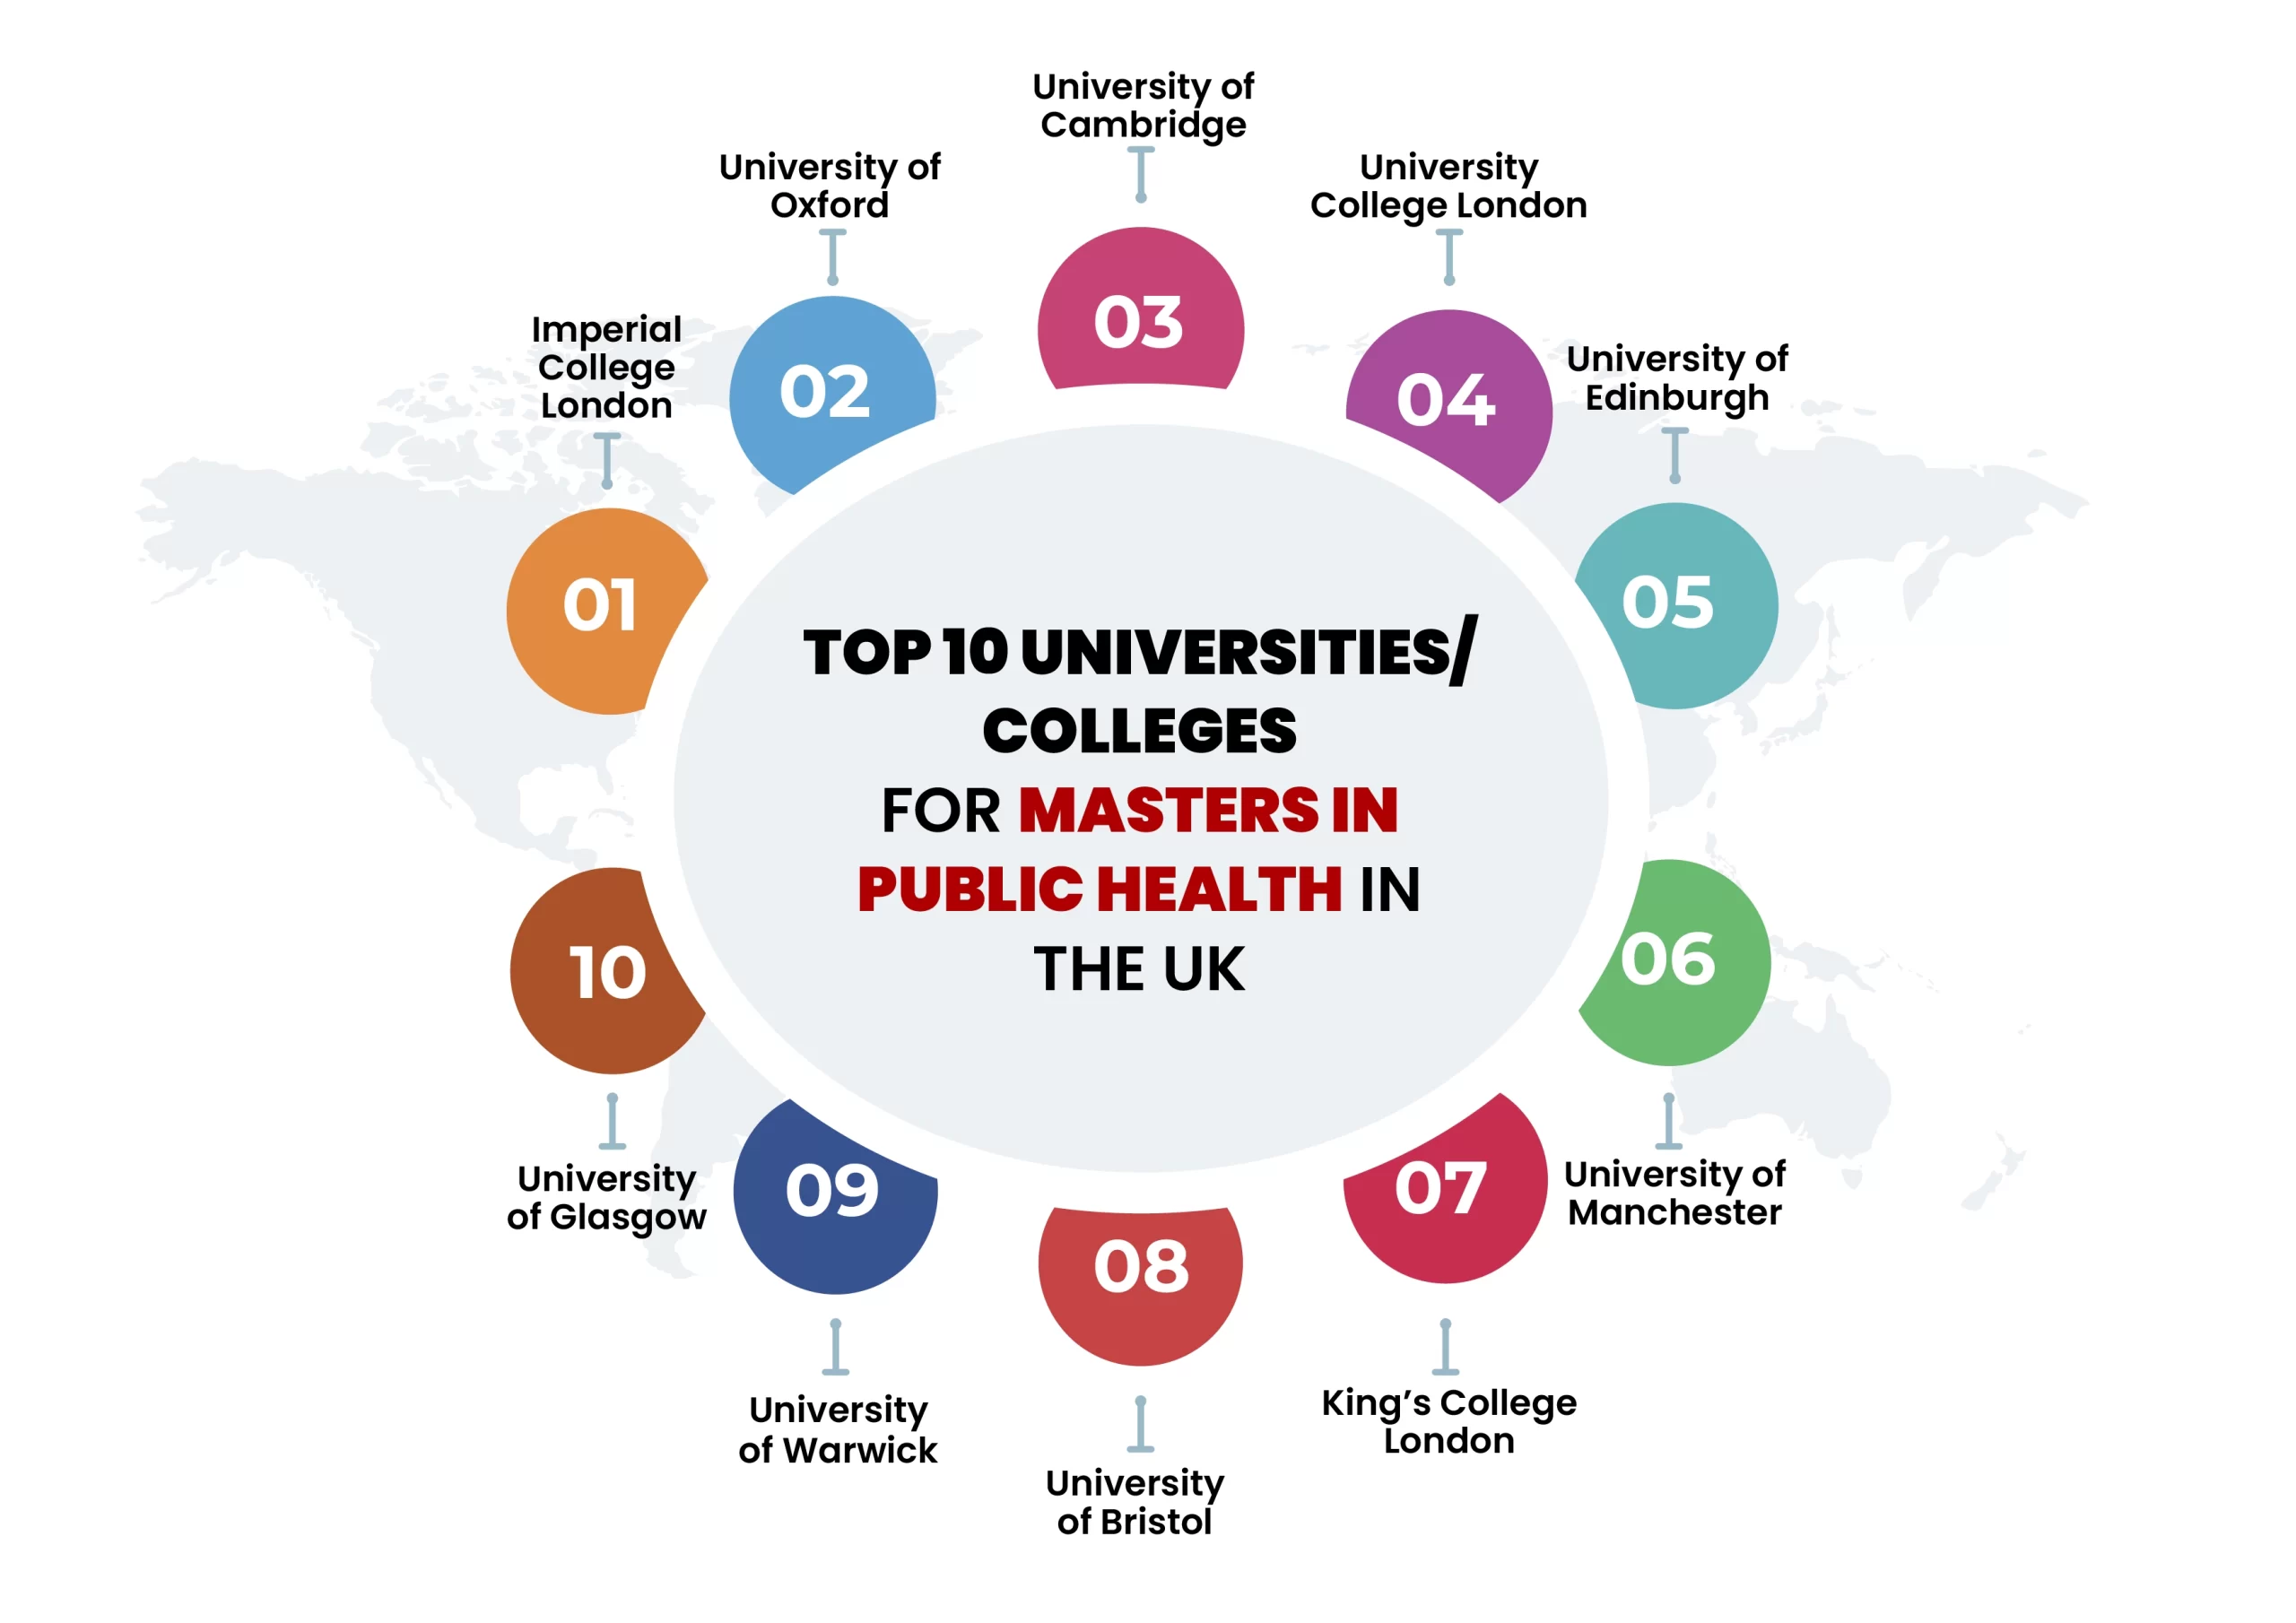 Top 10 Universities/Colleges for Masters in Public Health in The UK